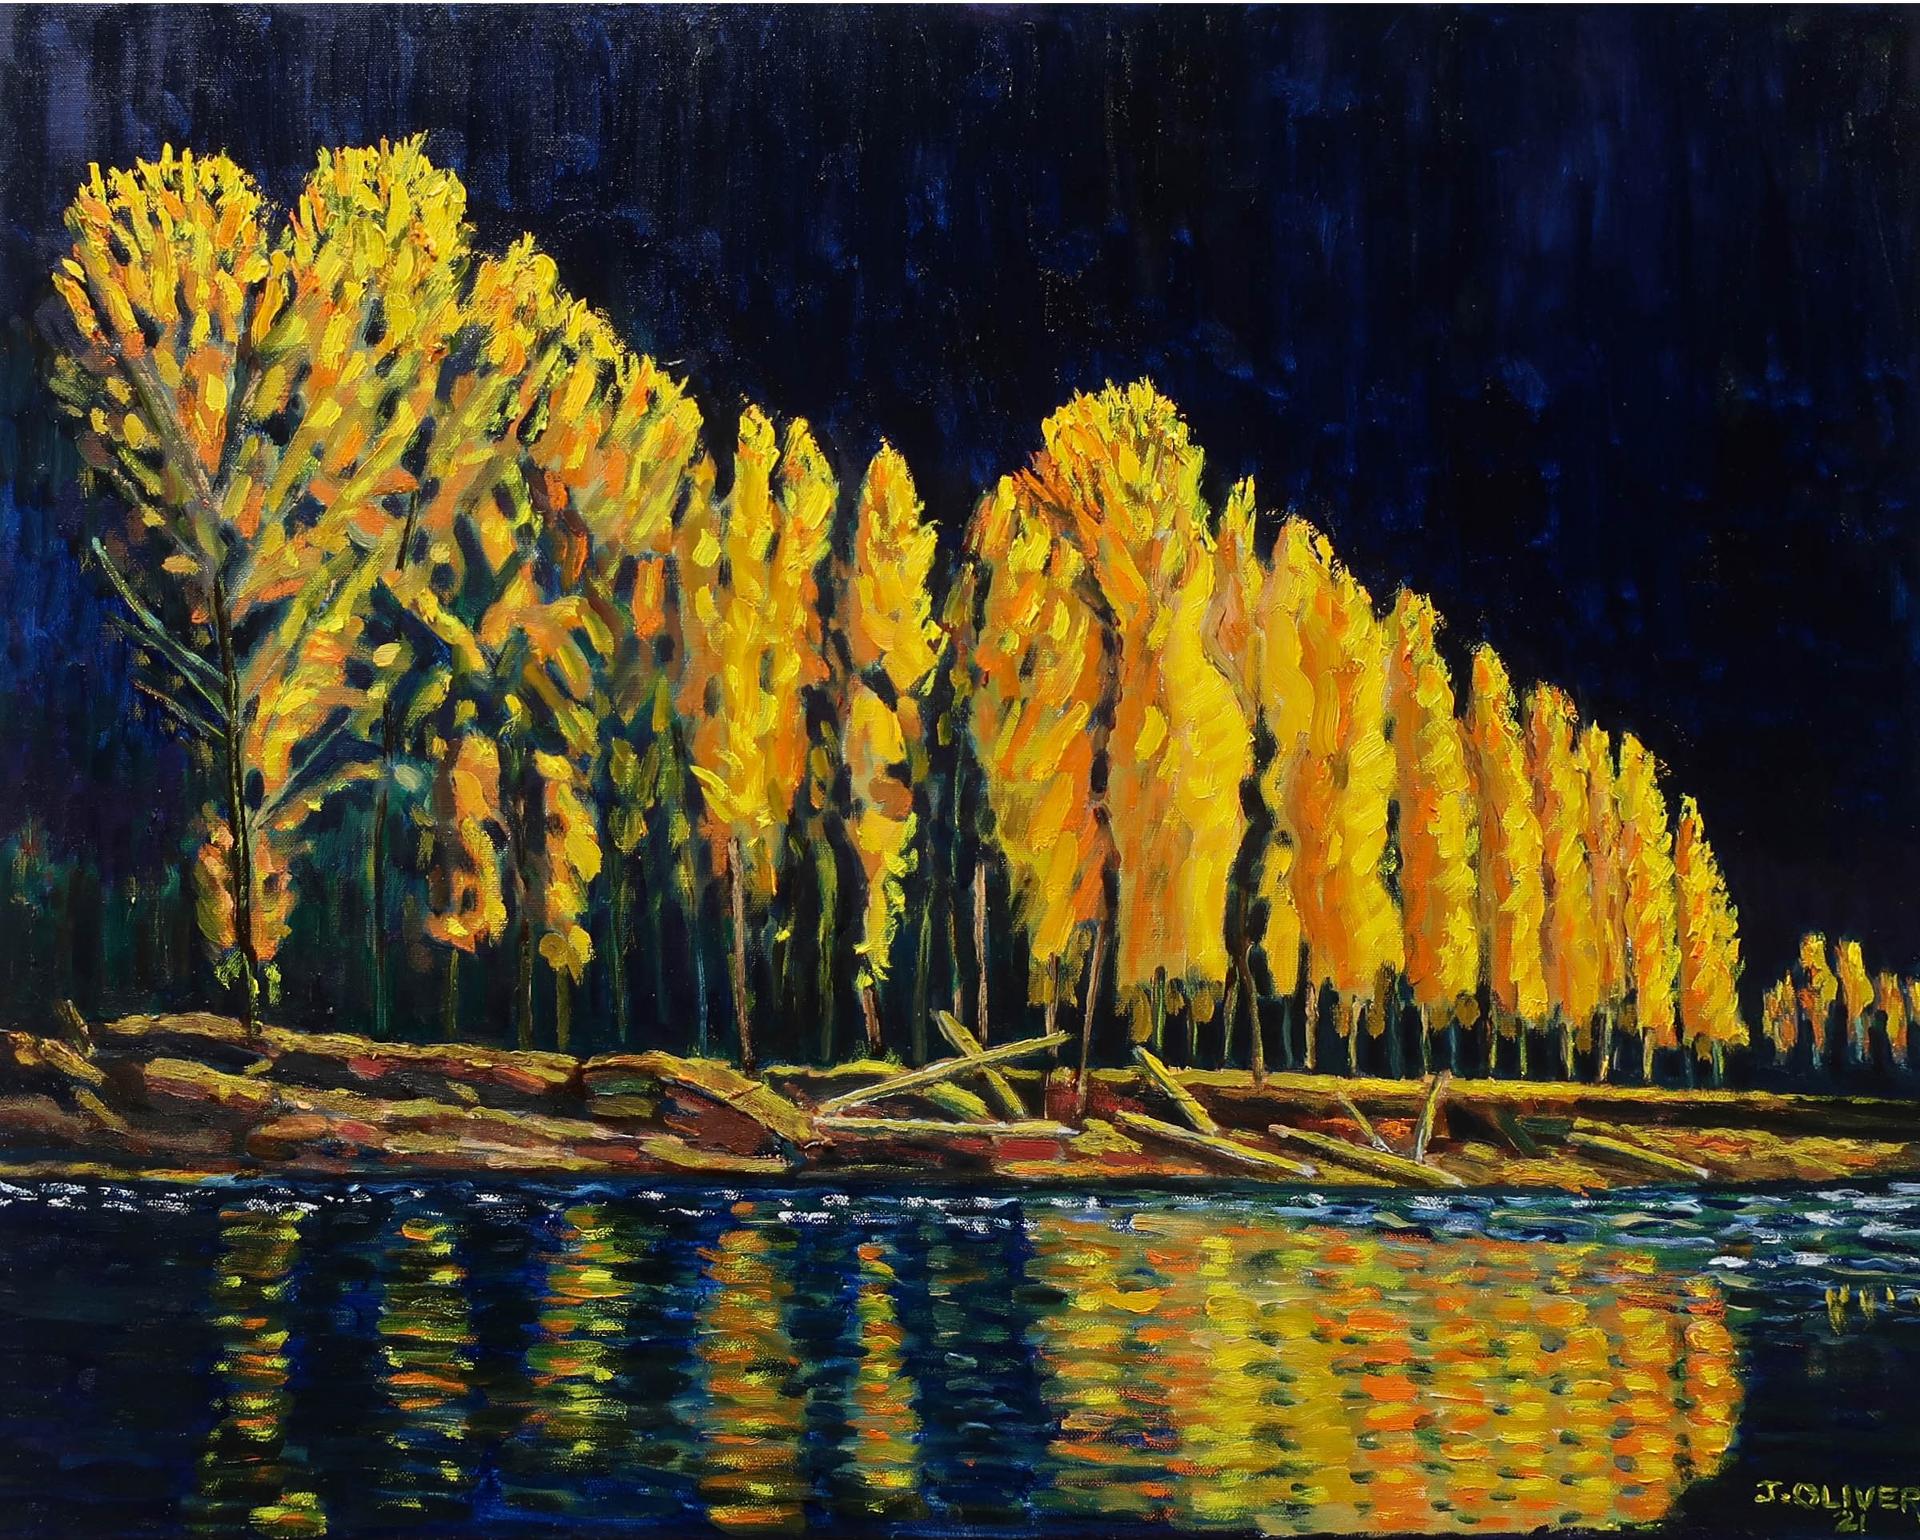 John Oliver (1939) - Night On The Saugeen River